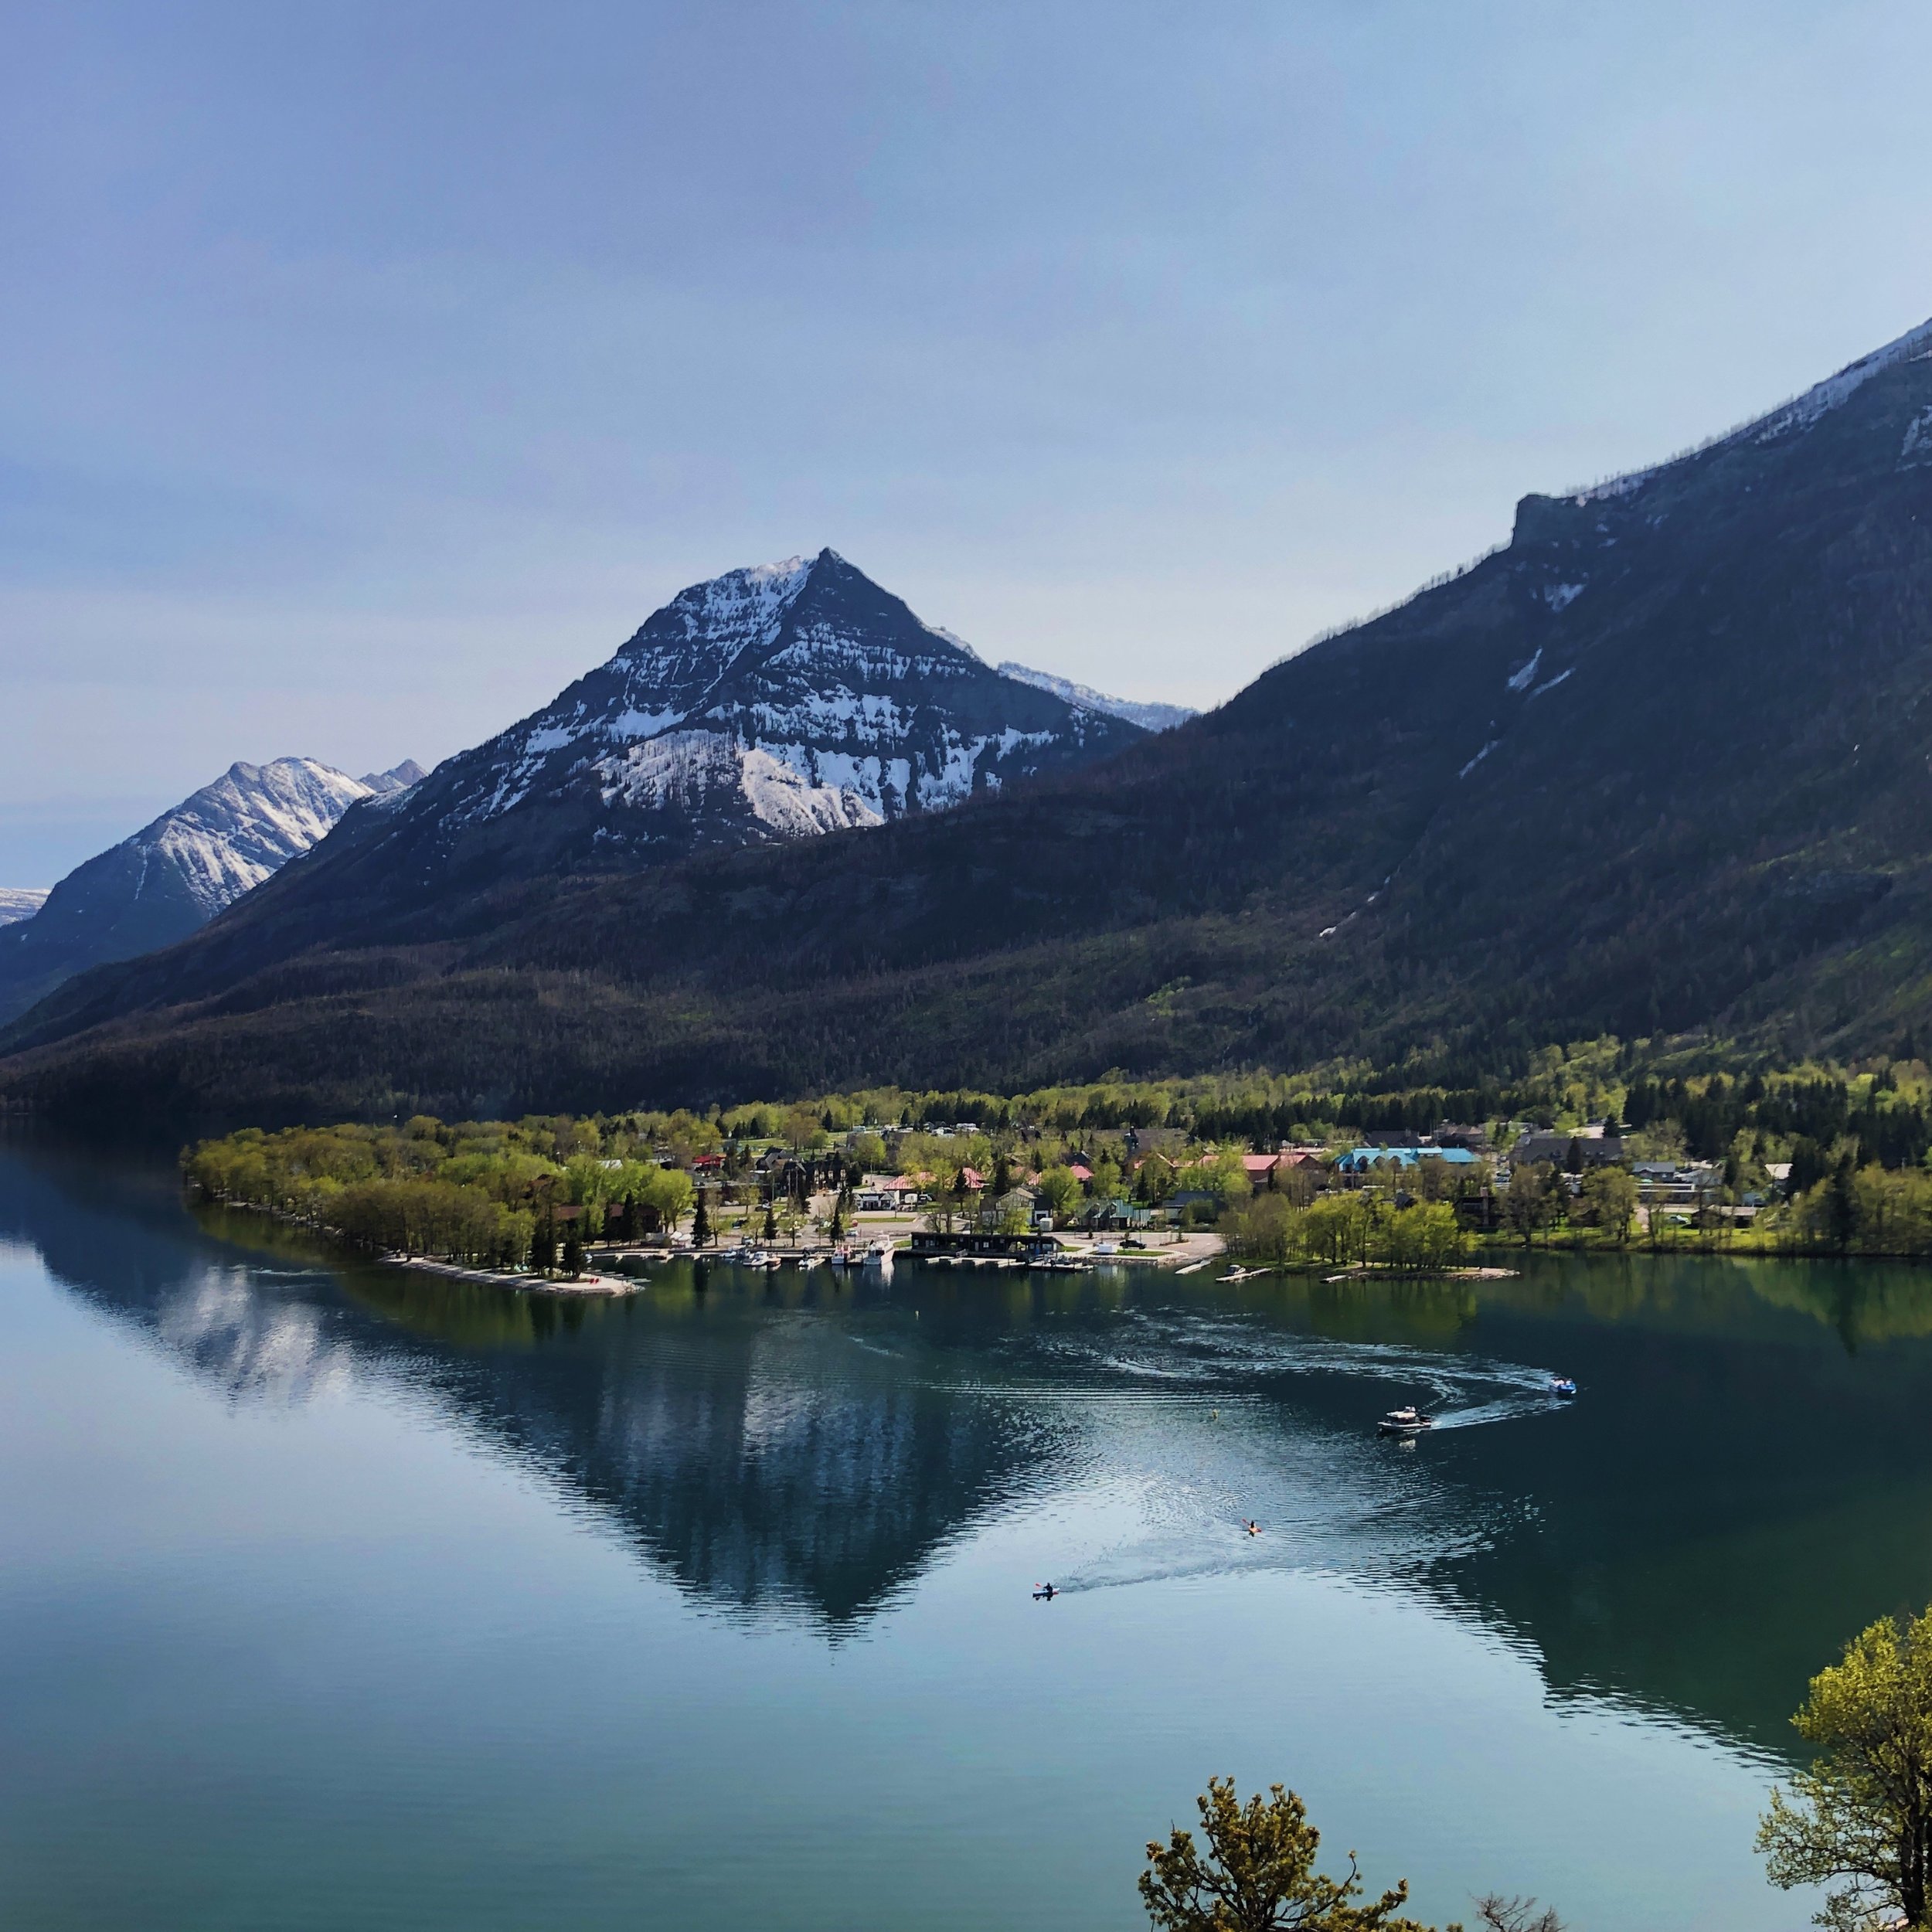 View from the Prince of Wales Hotel in Waterton - Alberta, Canada